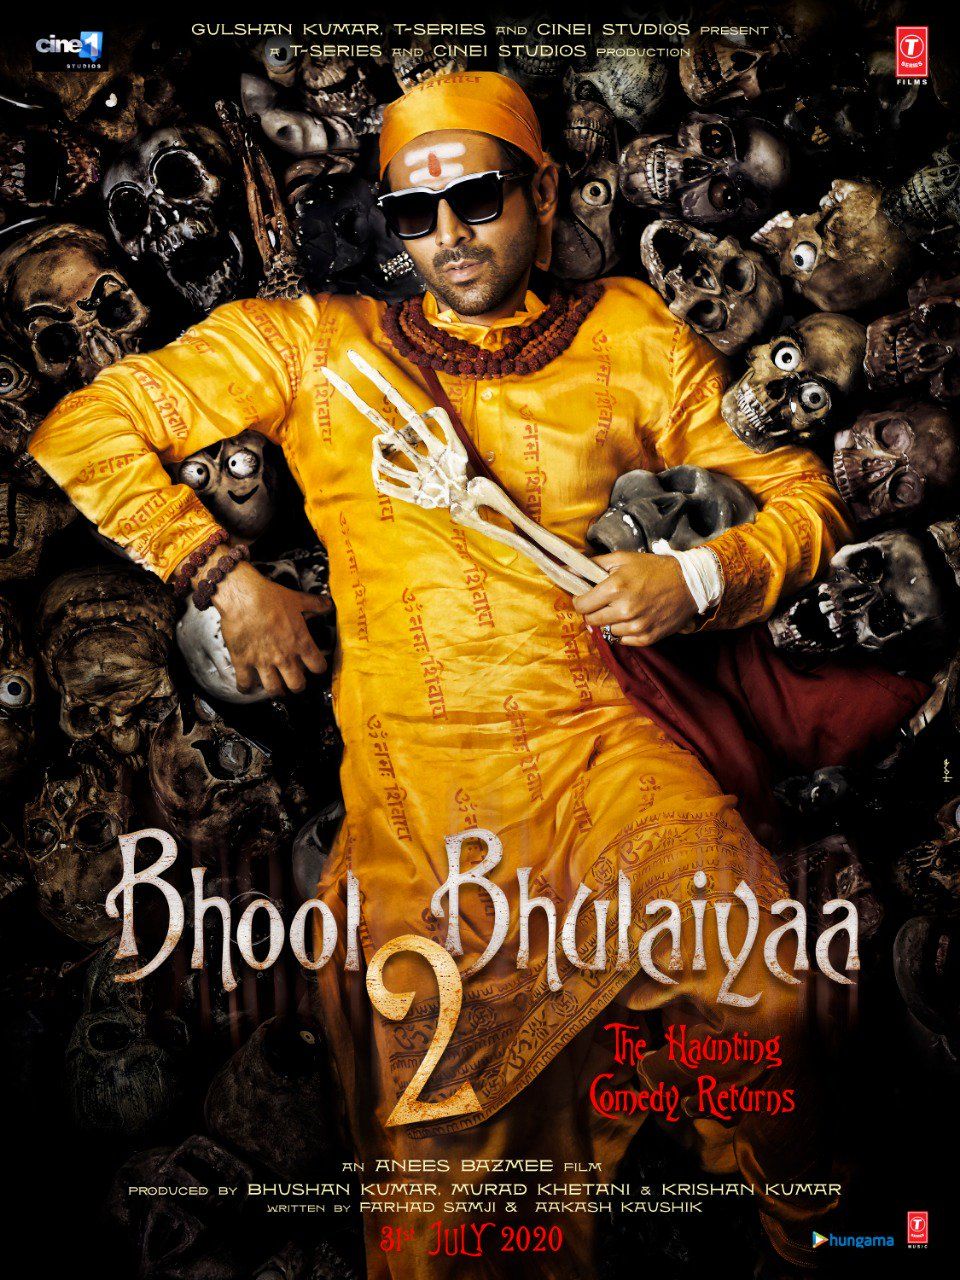 Bhool bhulaiyaa first look poster out now bollywood movies movie bollywood movie songs